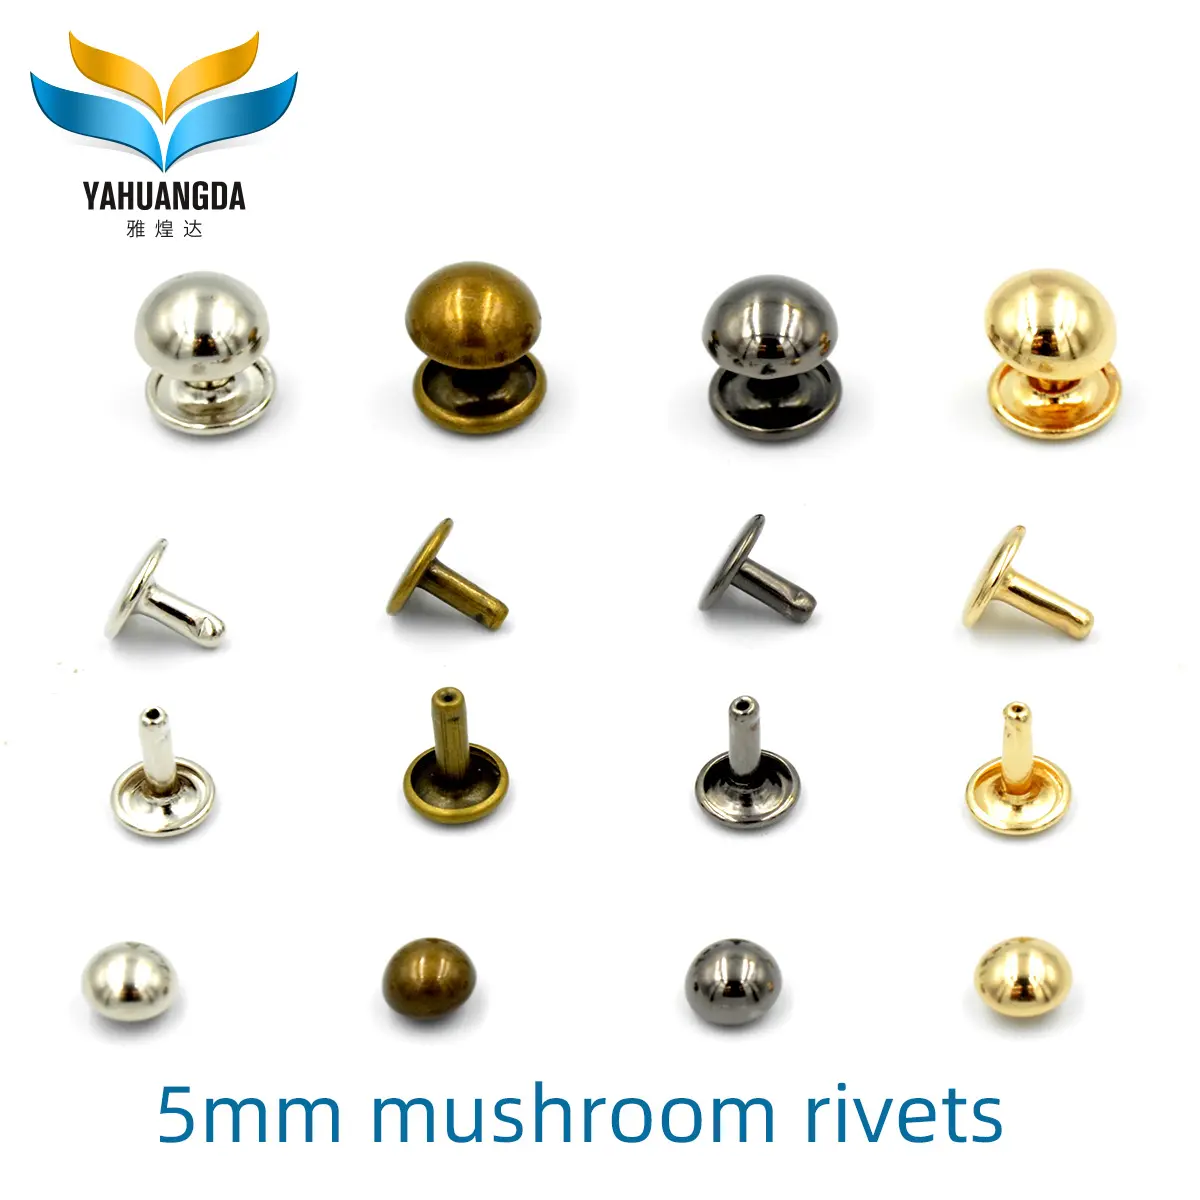 High Quality 5mm Double Mushroom Rivets Wholesale Factory Price Metal Screws and Leather Rivets for Handbags